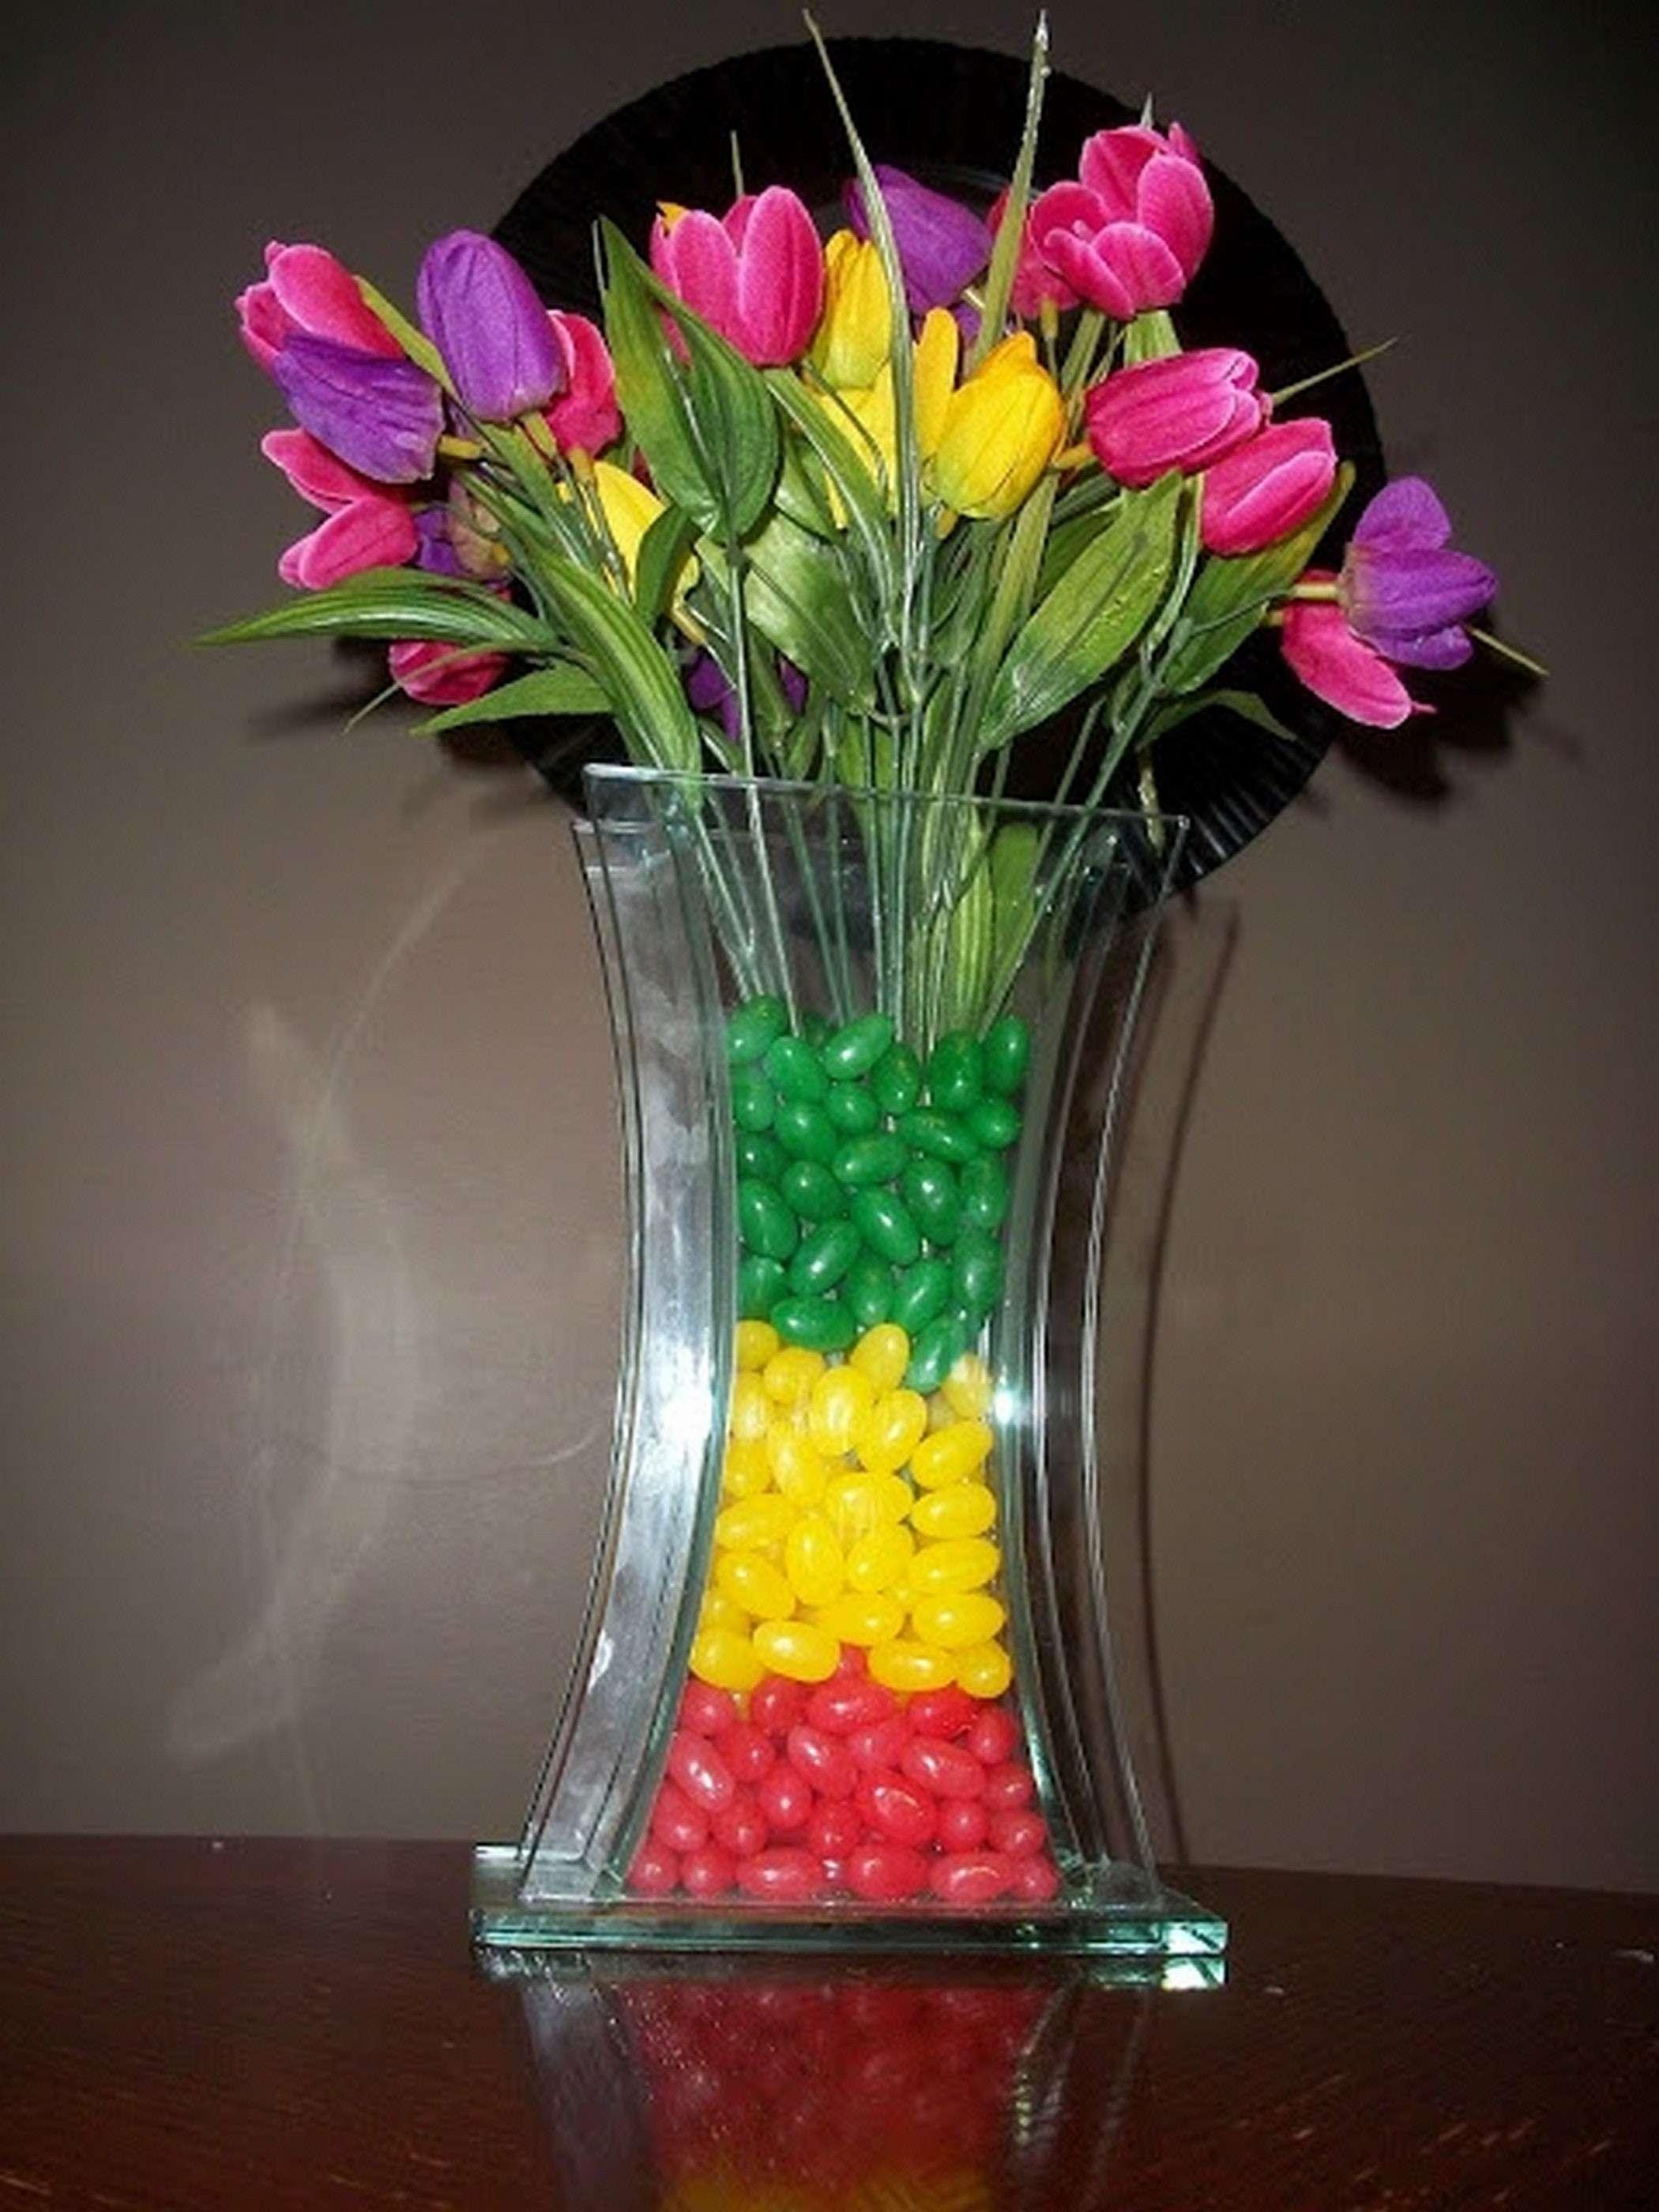 14 Awesome Home Decor Vase Fillers 2024 free download home decor vase fillers of easy diy ideas beautiful 15 cheap and easy diy vase filler ideas 3h with regard to easy diy ideas beautiful 15 cheap and easy diy vase filler ideas 3h vases flower